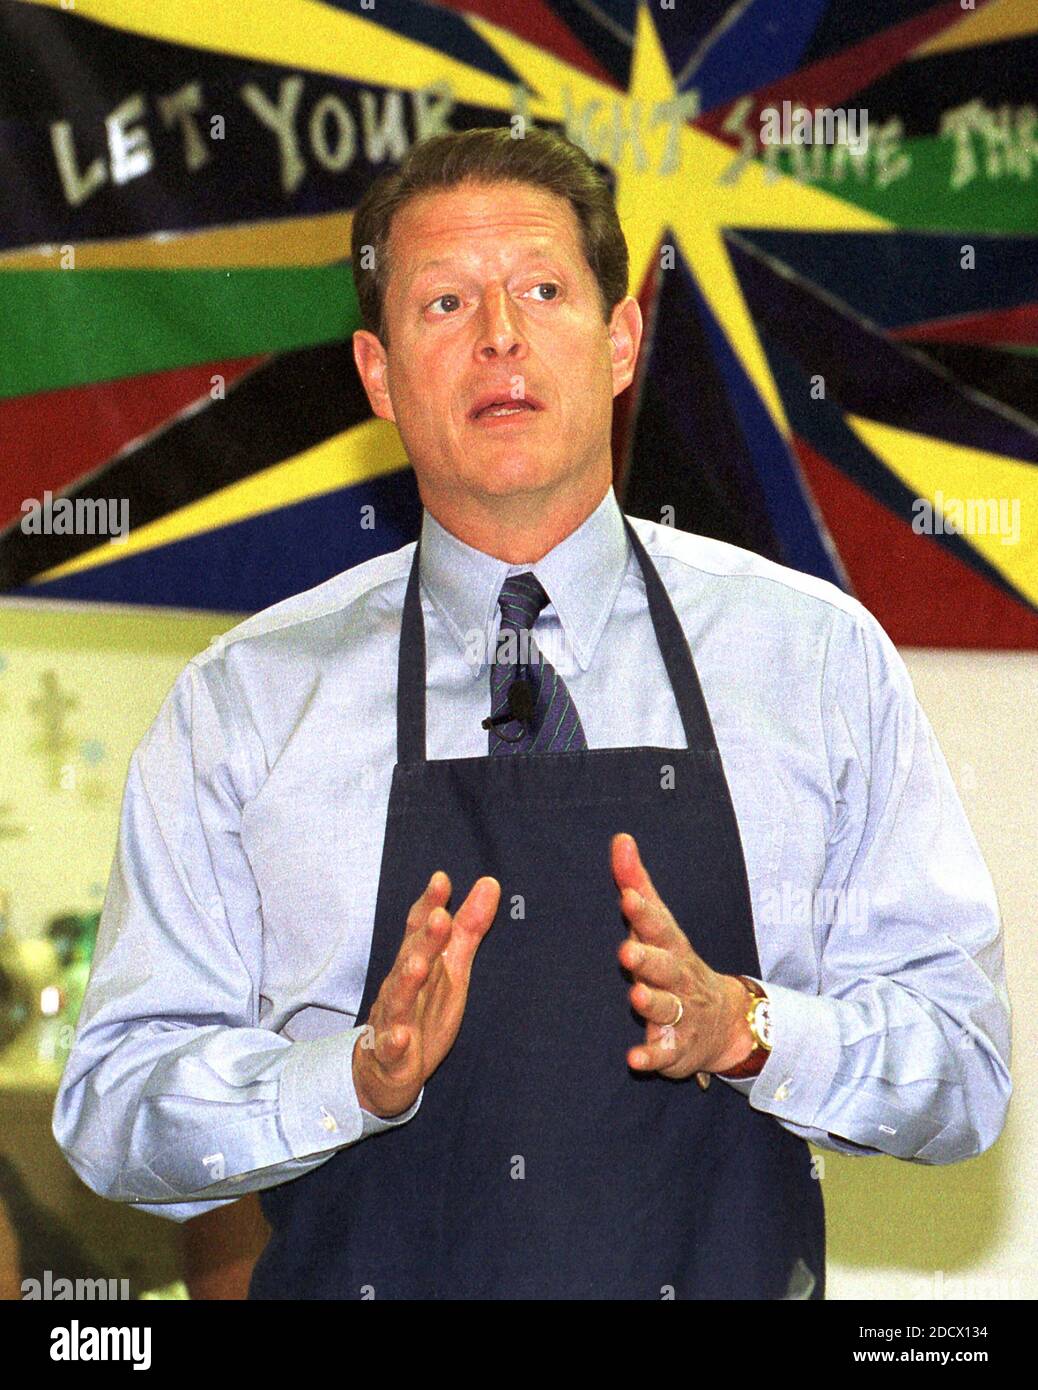 United States Vice President Al Gore proposes several initiatives to help working parents feed their families during a visit to Martha's Table in Washington, DC on 15 October, 1999.Credit: Ron Sachs / CNP/ABACAPRESS.COM Stock Photo